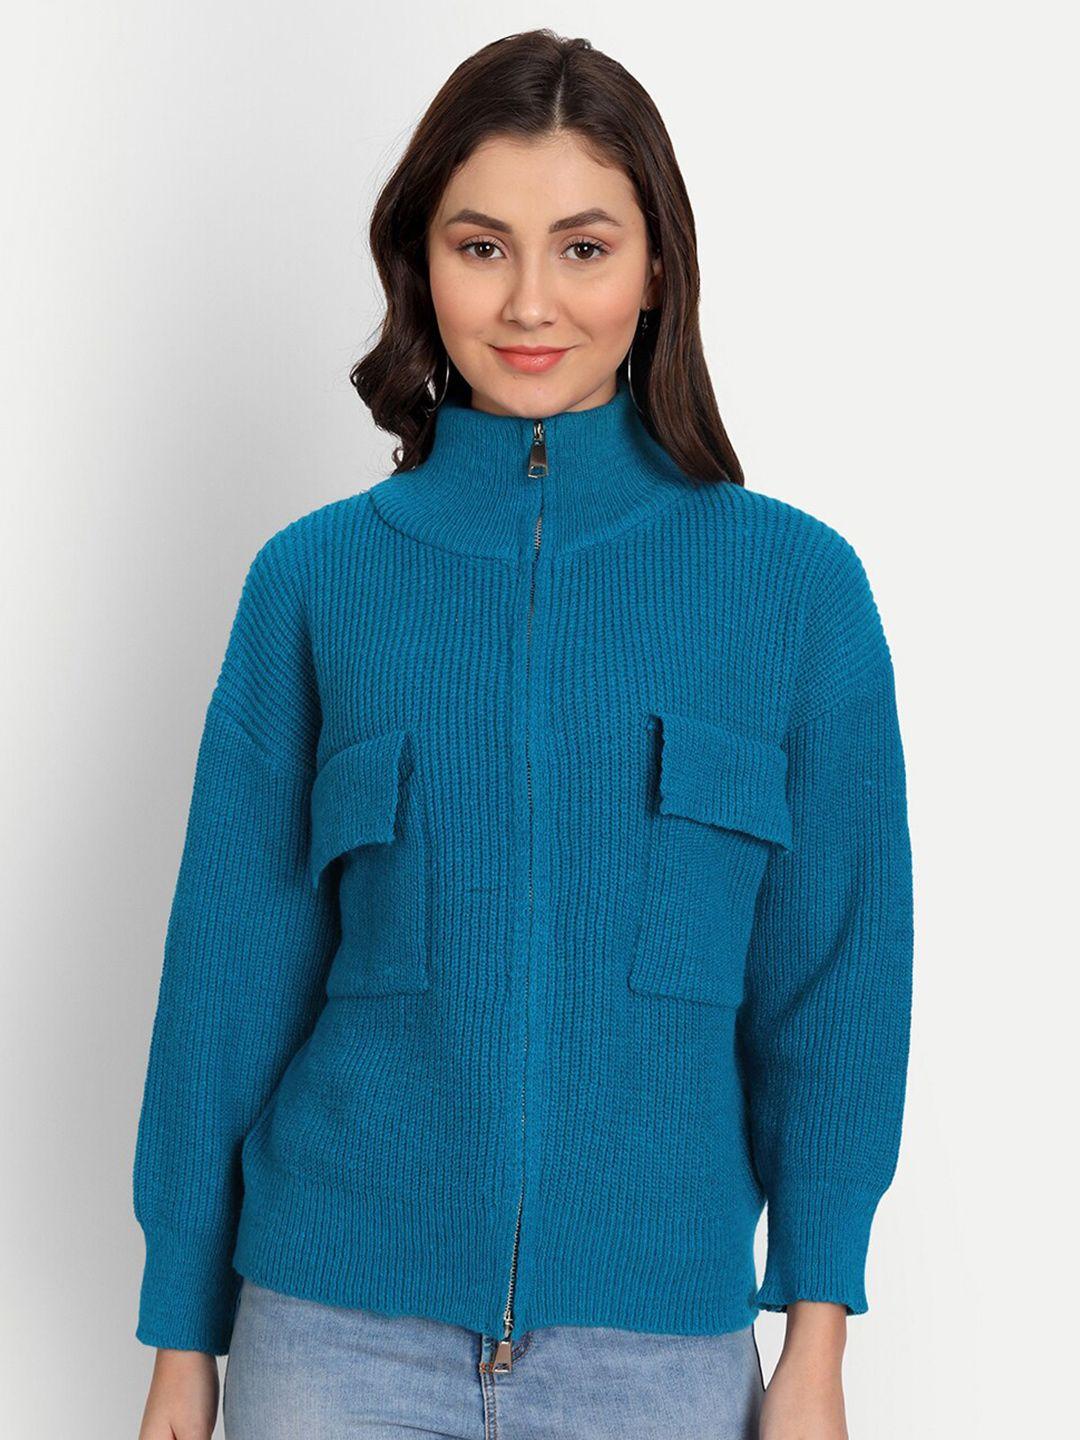 iki chic women blue cable knit zip sweater